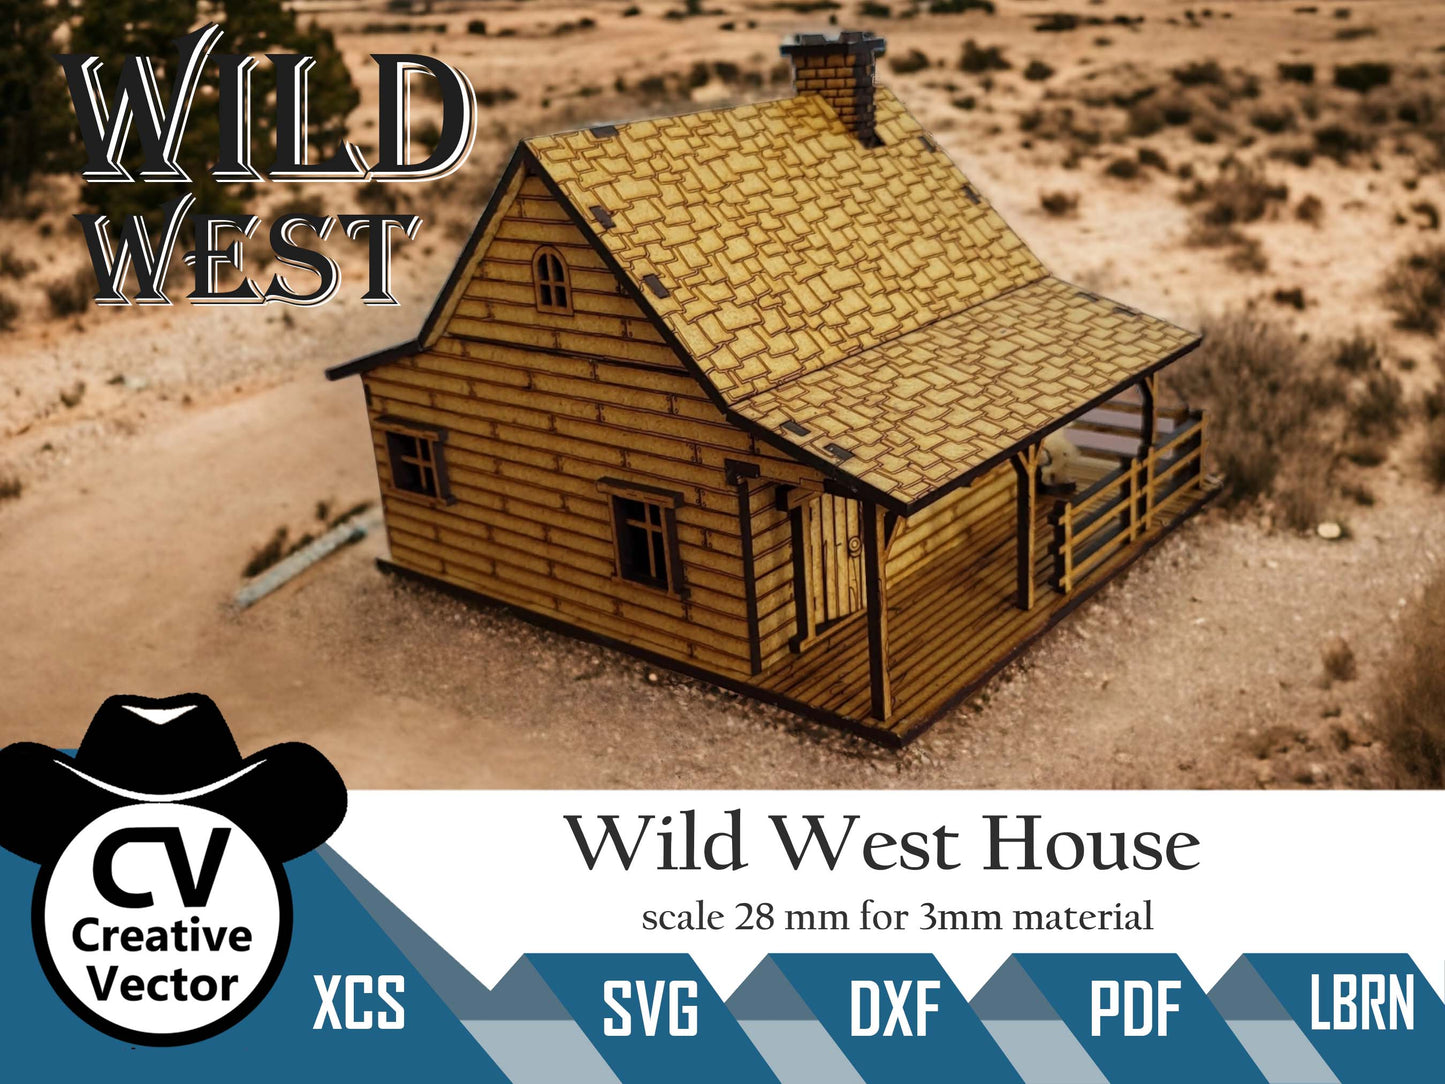 Wild West House in scale 28mm for Wargamers